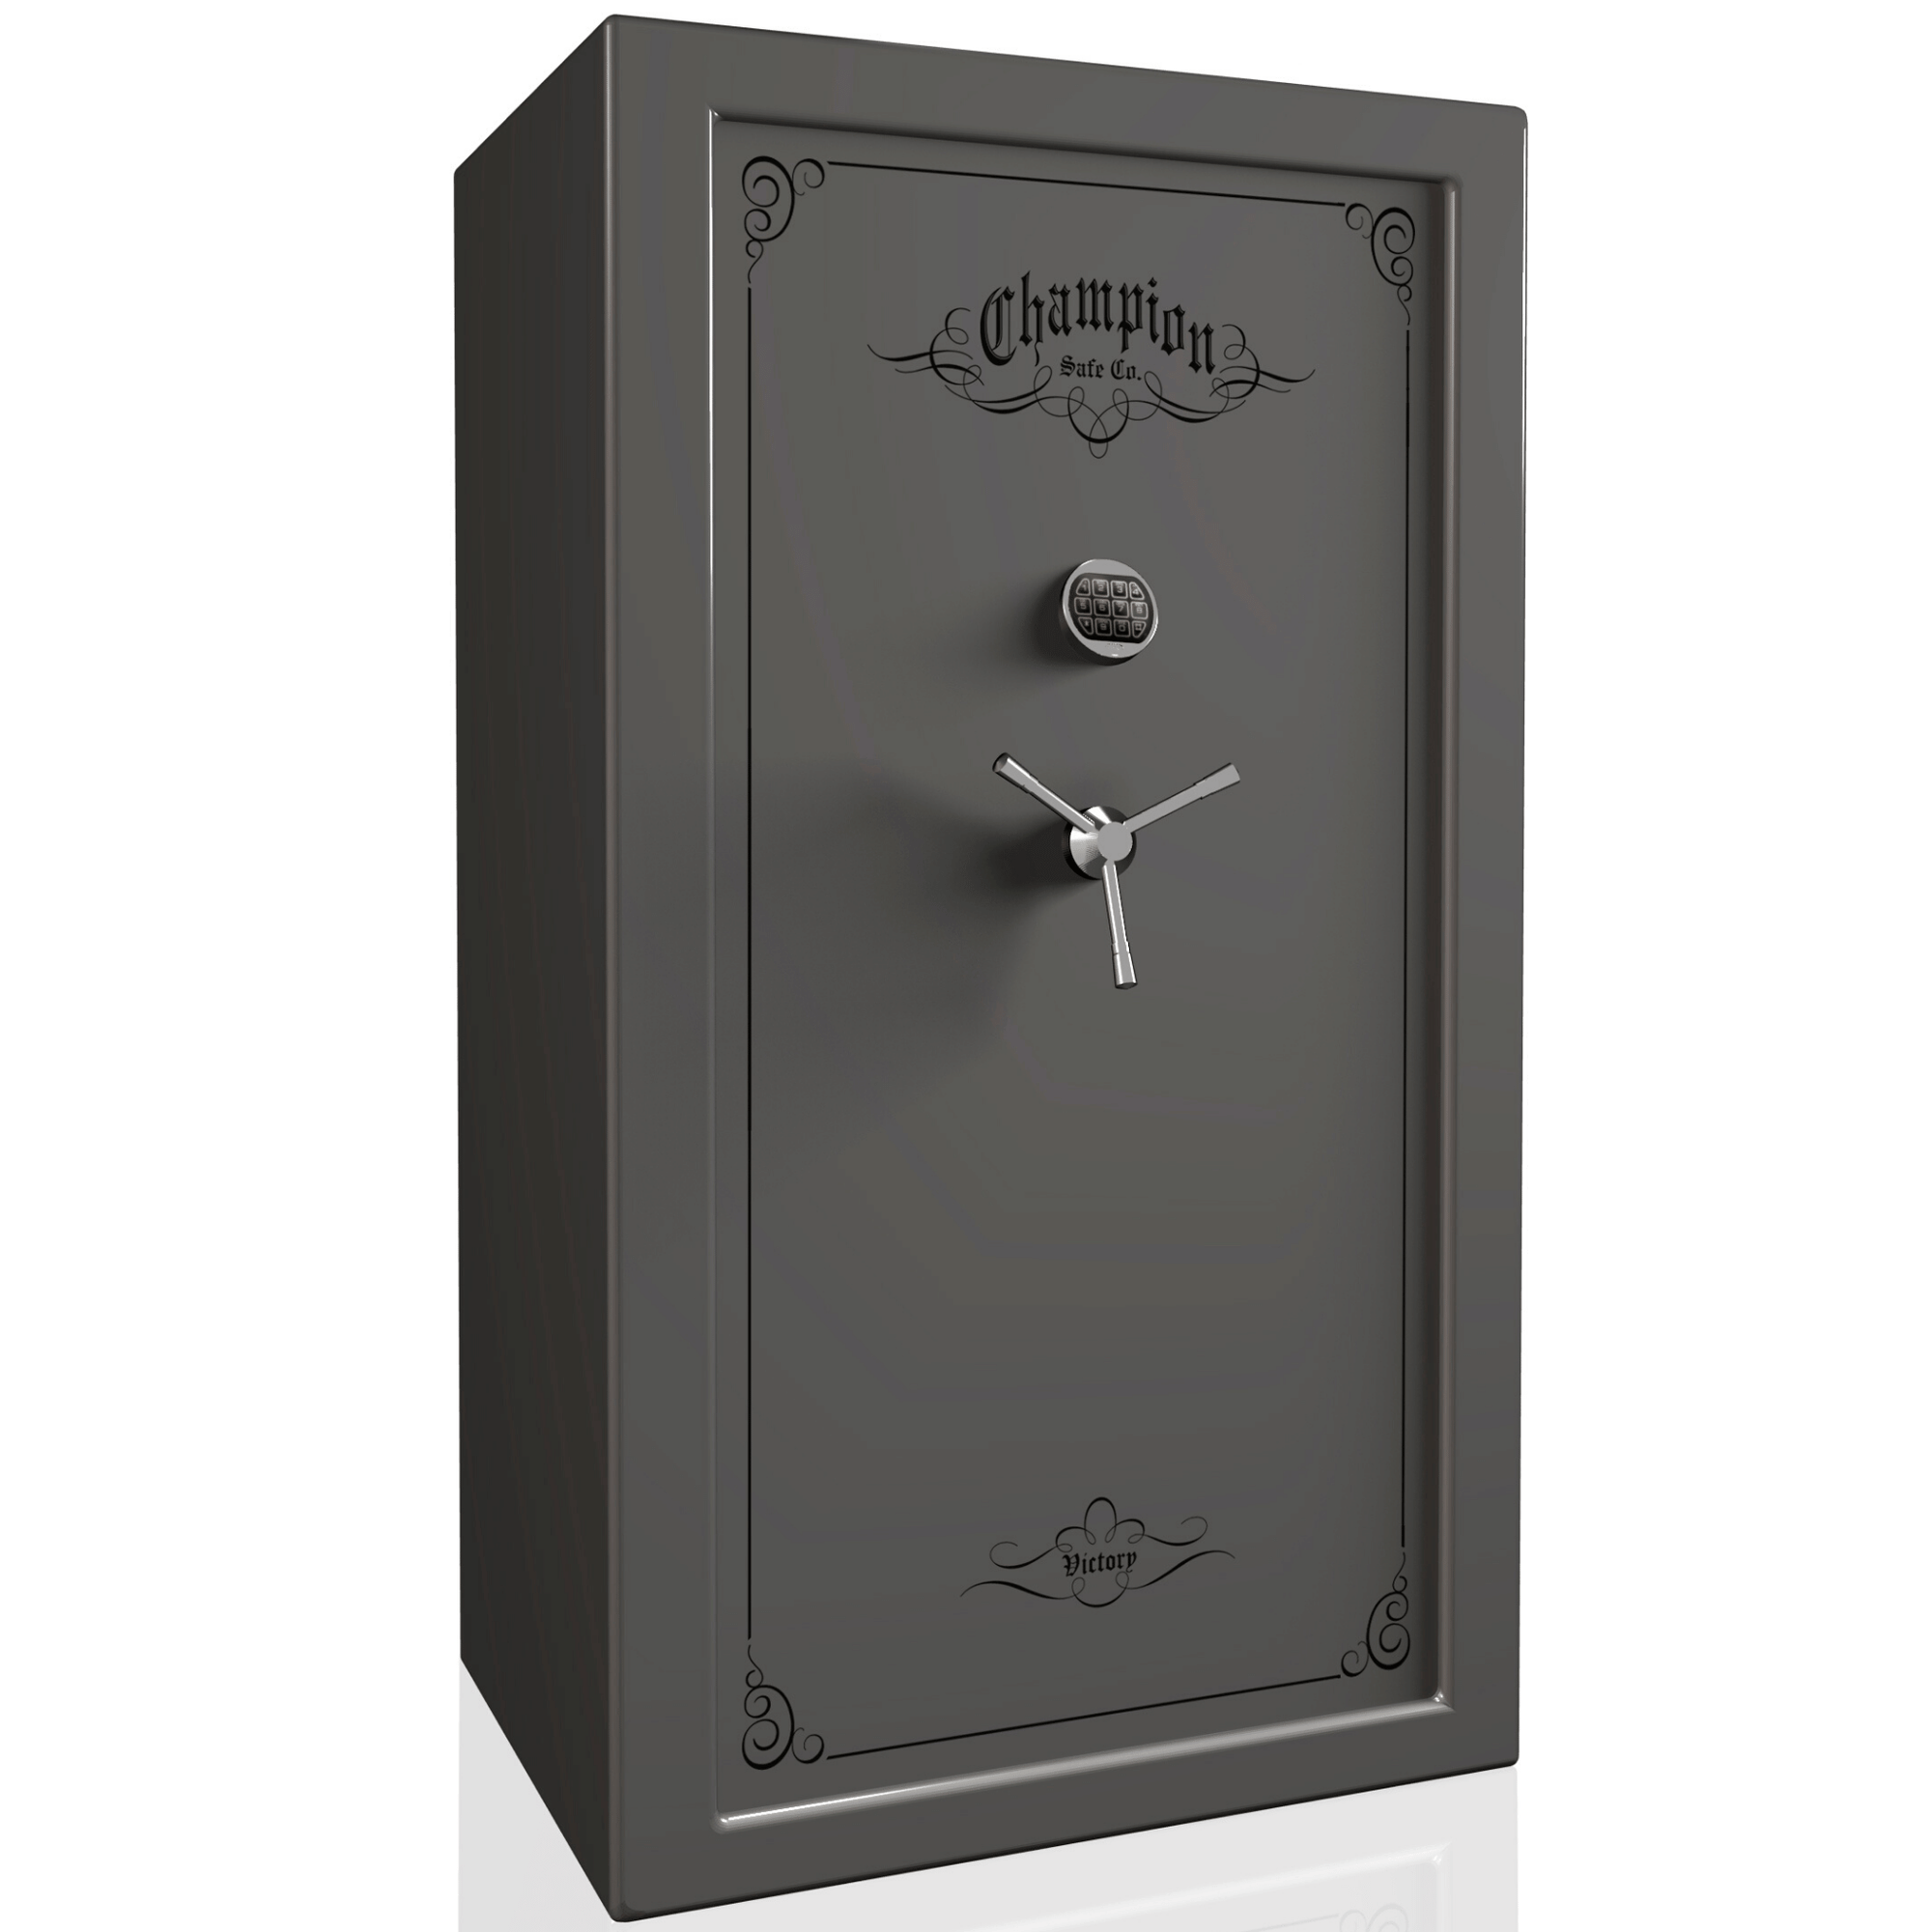 Champion Safe - Victory Series - Security Safe